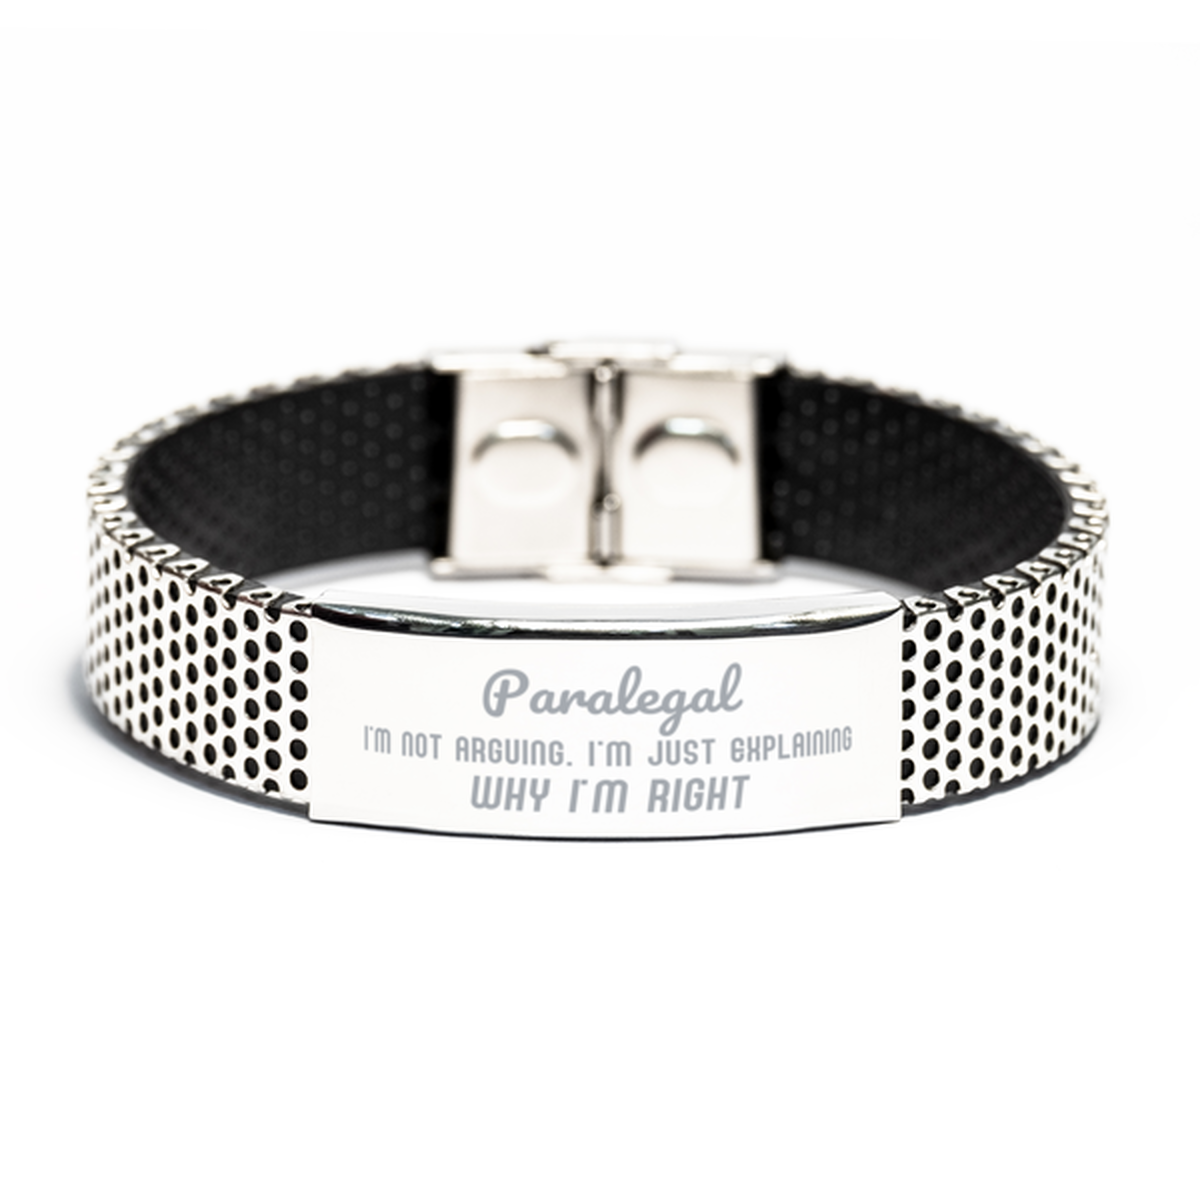 Paralegal I'm not Arguing. I'm Just Explaining Why I'm RIGHT Stainless Steel Bracelet, Funny Saying Quote Paralegal Gifts For Paralegal Graduation Birthday Christmas Gifts for Men Women Coworker